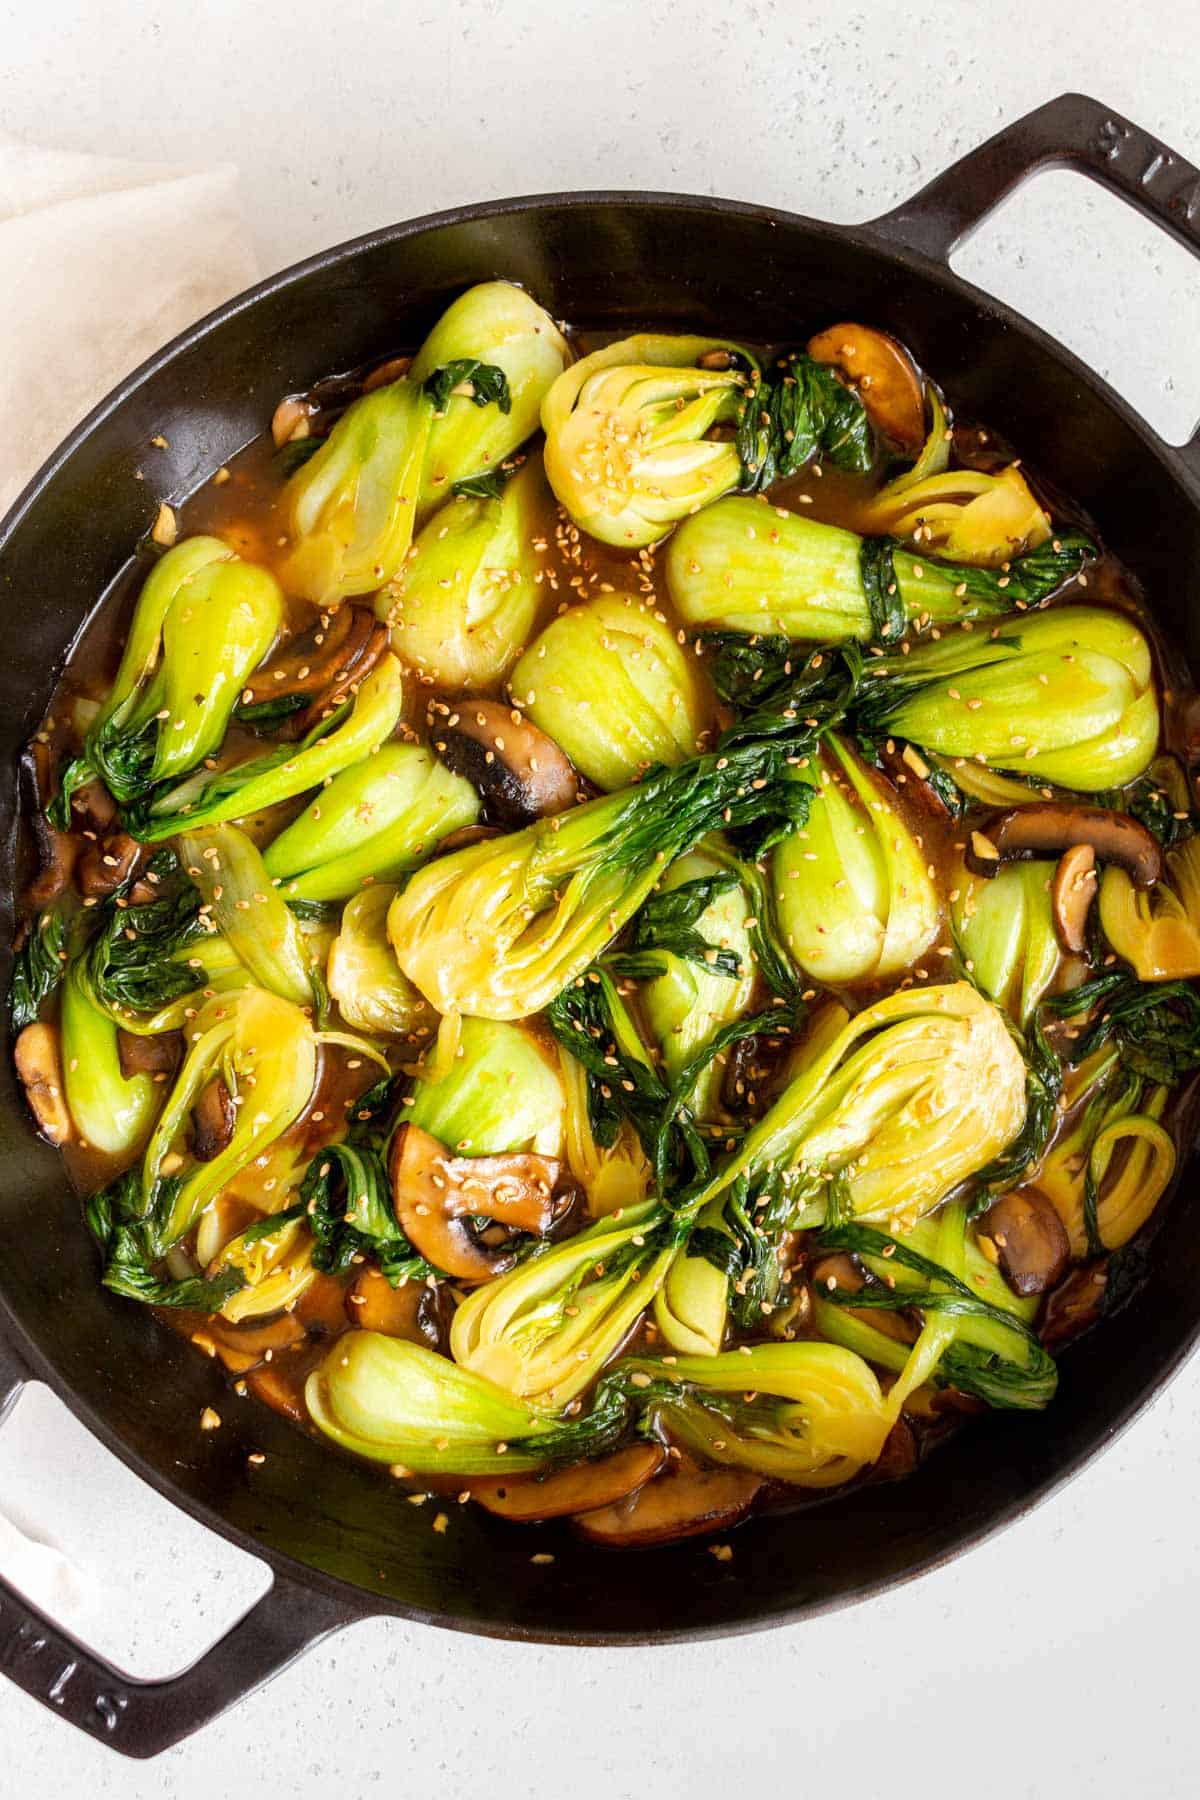 Overhead view of a skillet of bok choy stir fry.